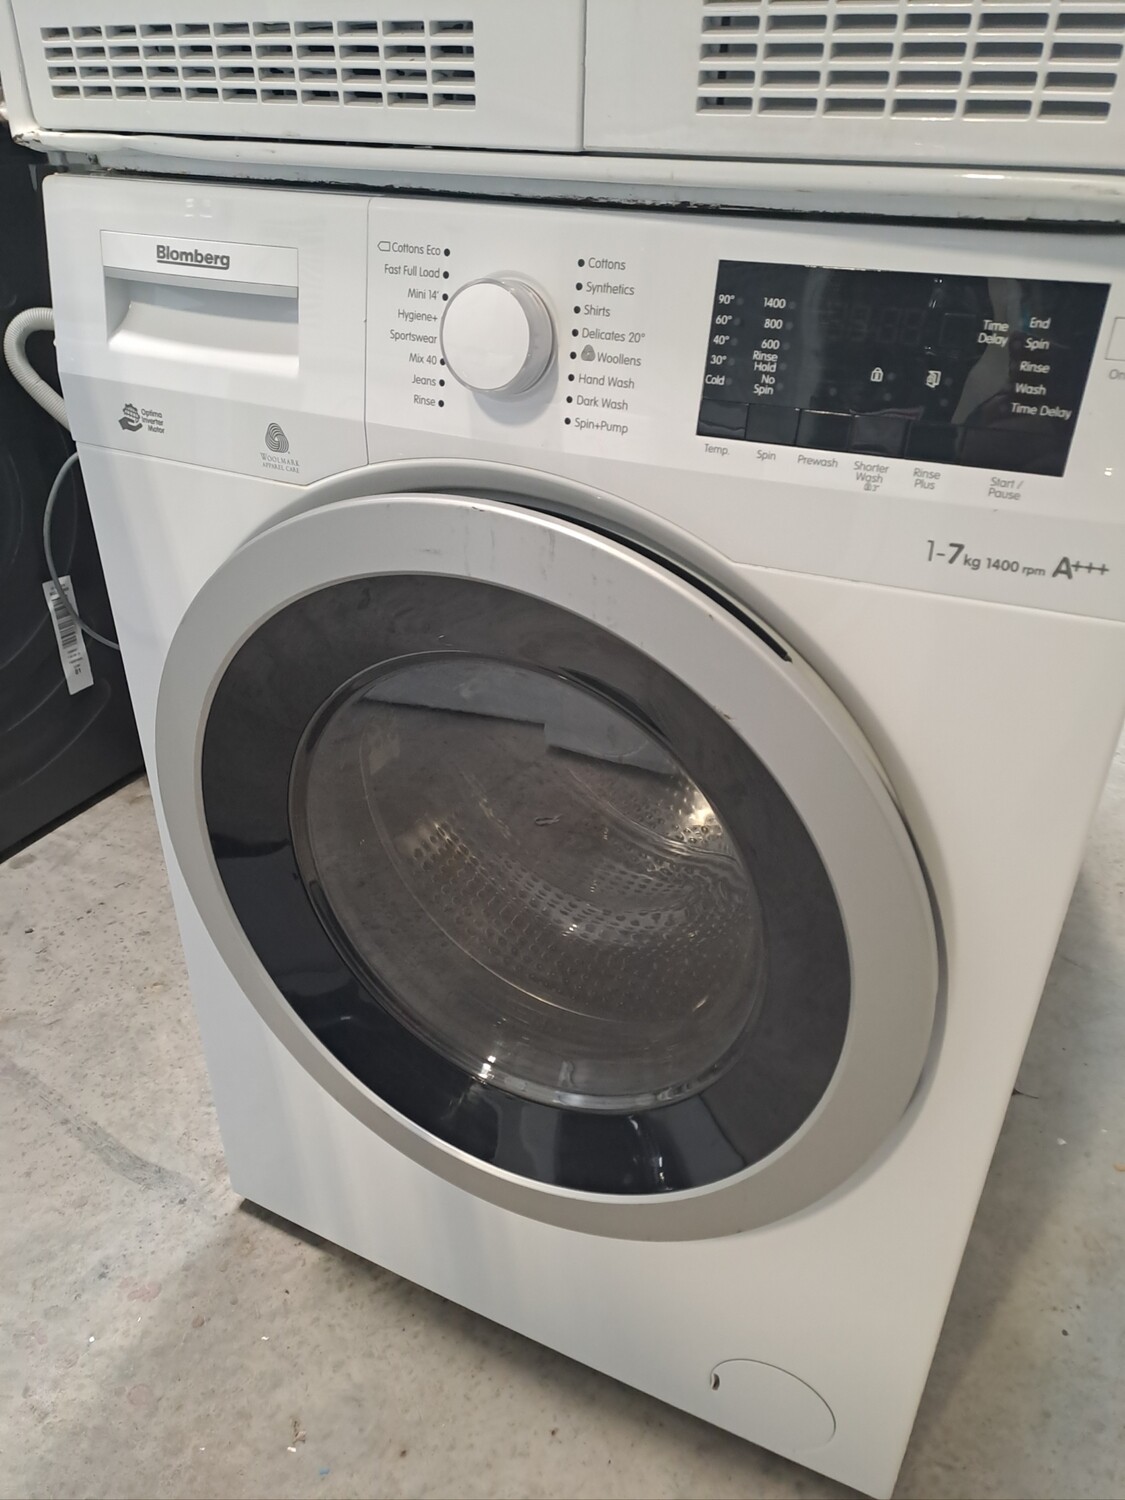 Bomberg LWF27441W 7kg Load 1400 Spin A+++ Washing Machine - White - Refurbished - 6 Month Guarantee. This item is located at our Whitby Road Shop